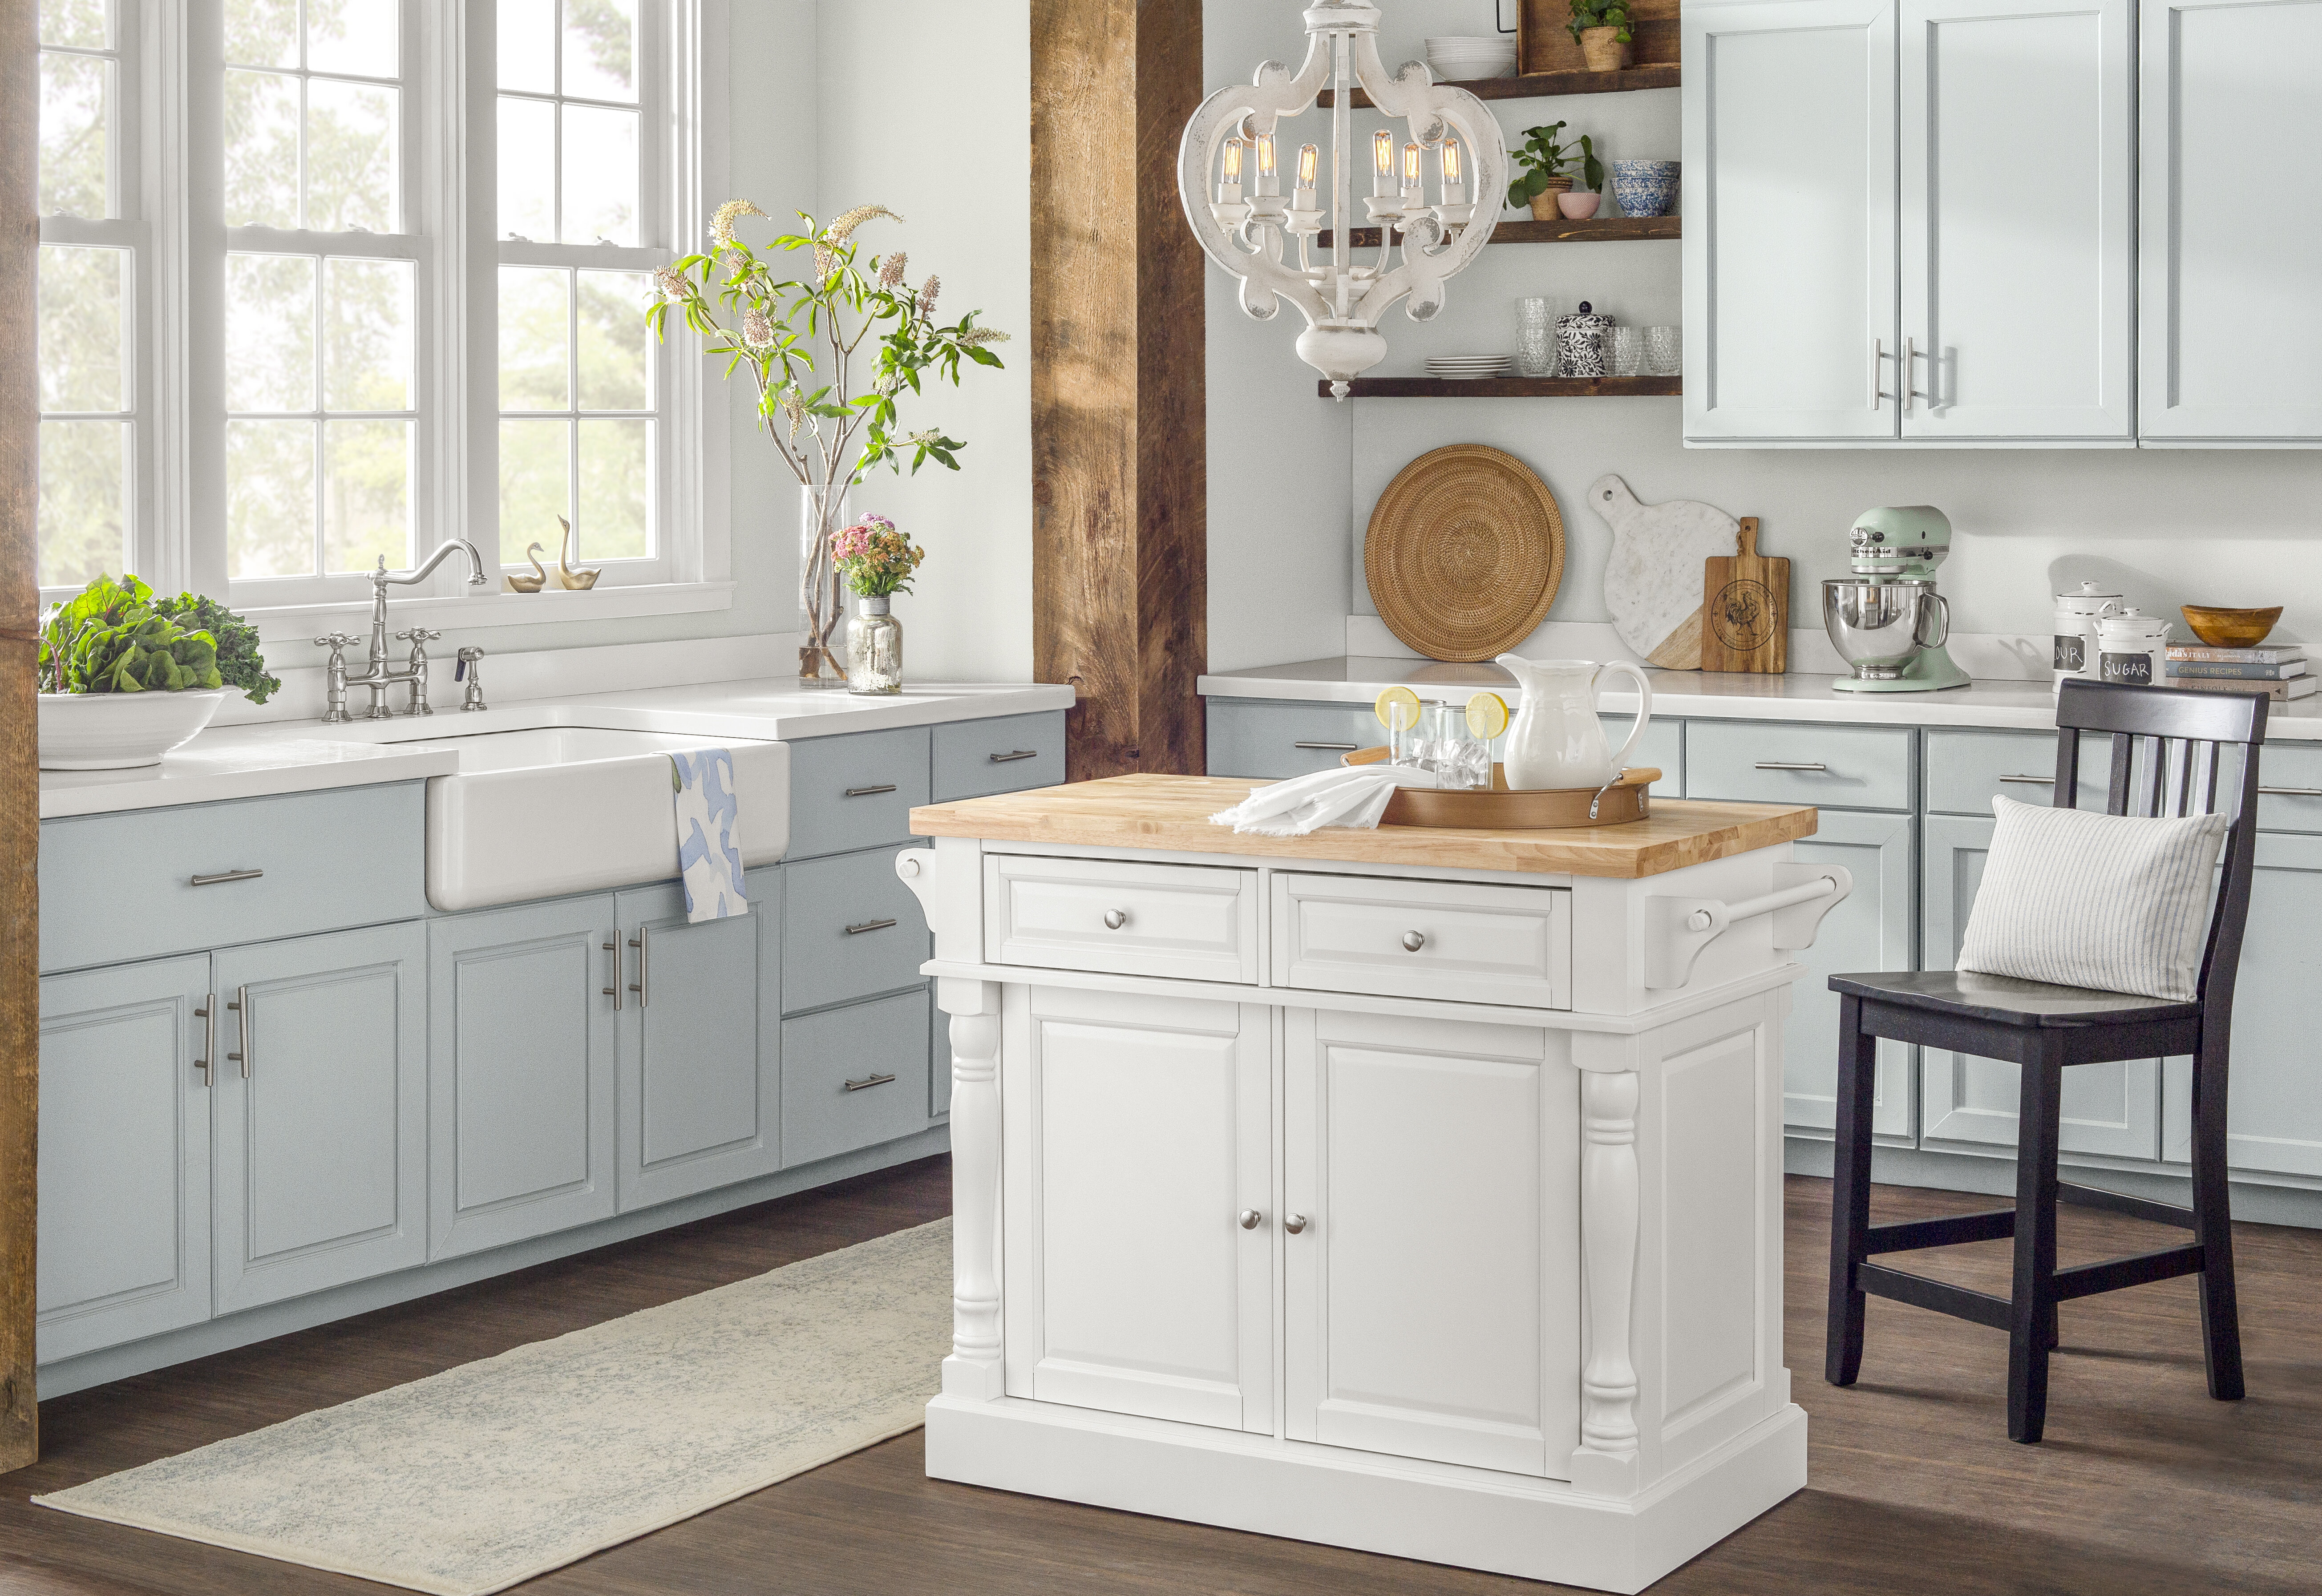 French country kitchen: decor, cabinets, ideas and curtains